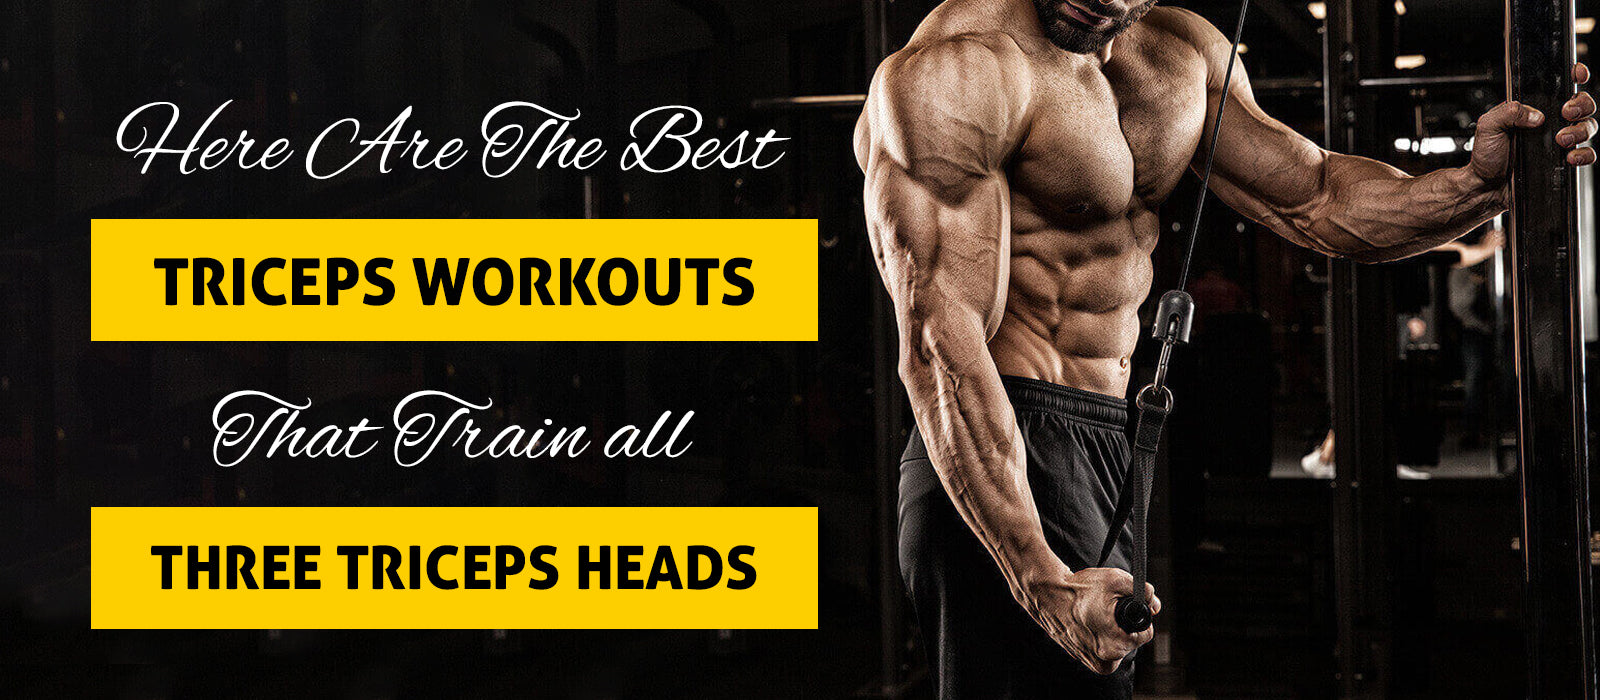 Here Are The Best Triceps Workouts That Train all Three Triceps